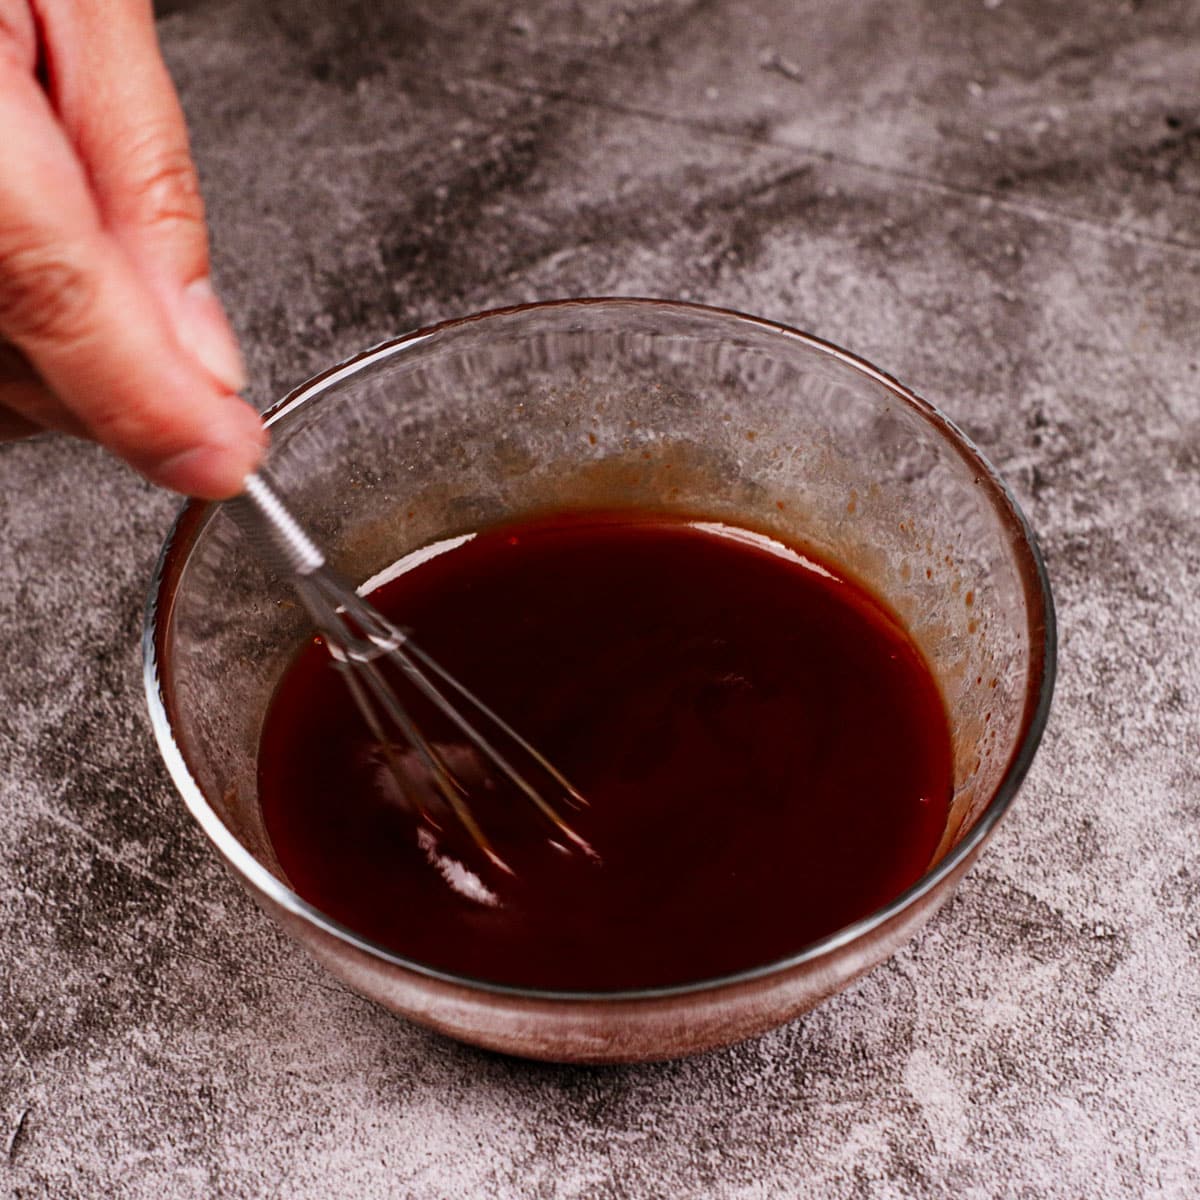 Mixing barbecue sauce in a small glass bowl.